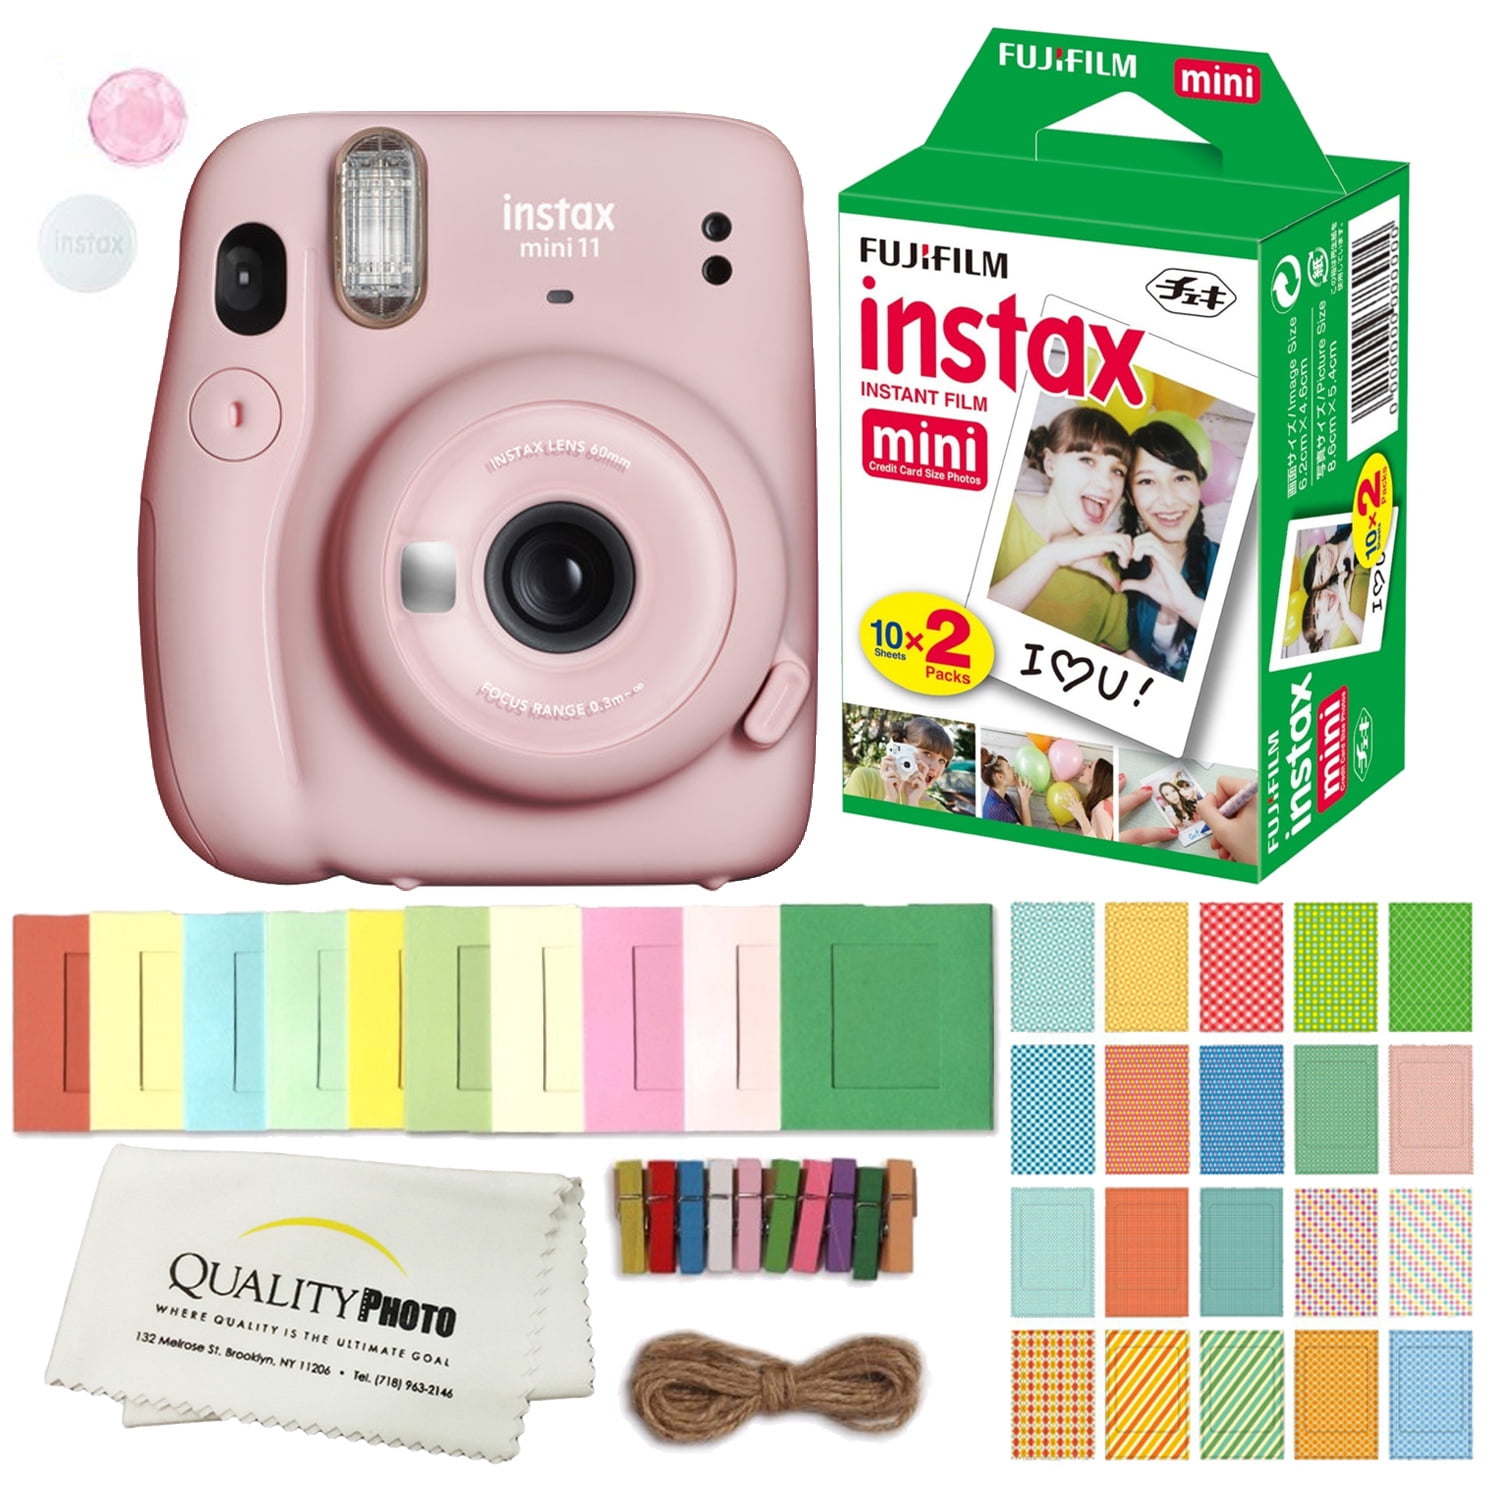  Fujifilm Instax Mini EVO Hybrid Instant Film Camera (Black)  (16745183) Bundle with 40 Instant Film Sheets + 32GB Memory Card + Small  Padded Case + SD Card Reader + Microfiber Cleaning Cloth : Electronics